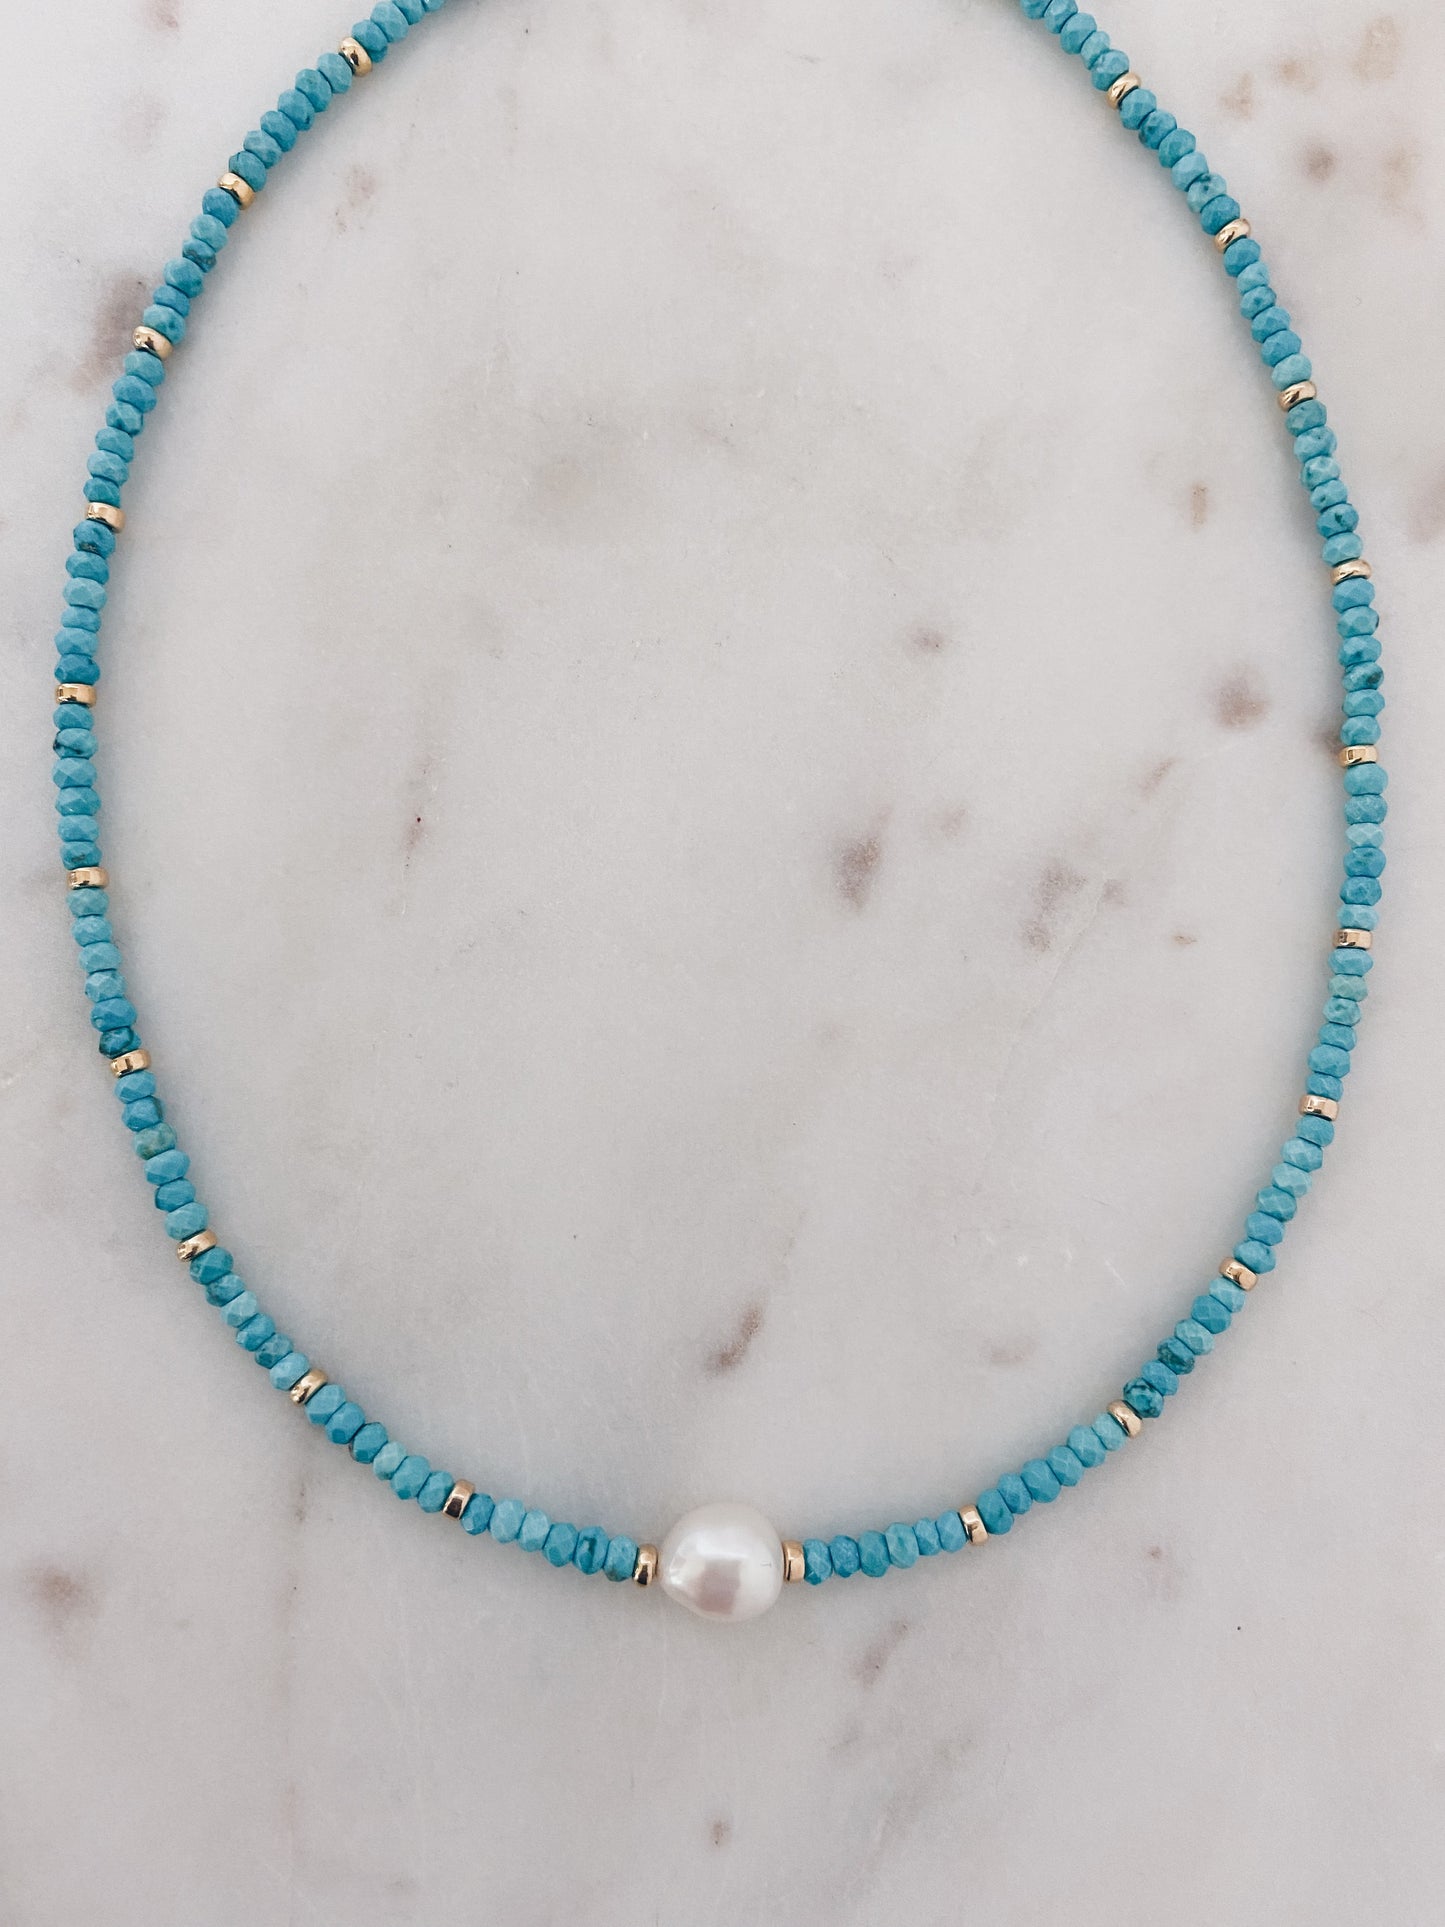 Turquoise & Pearl Choker + More Options